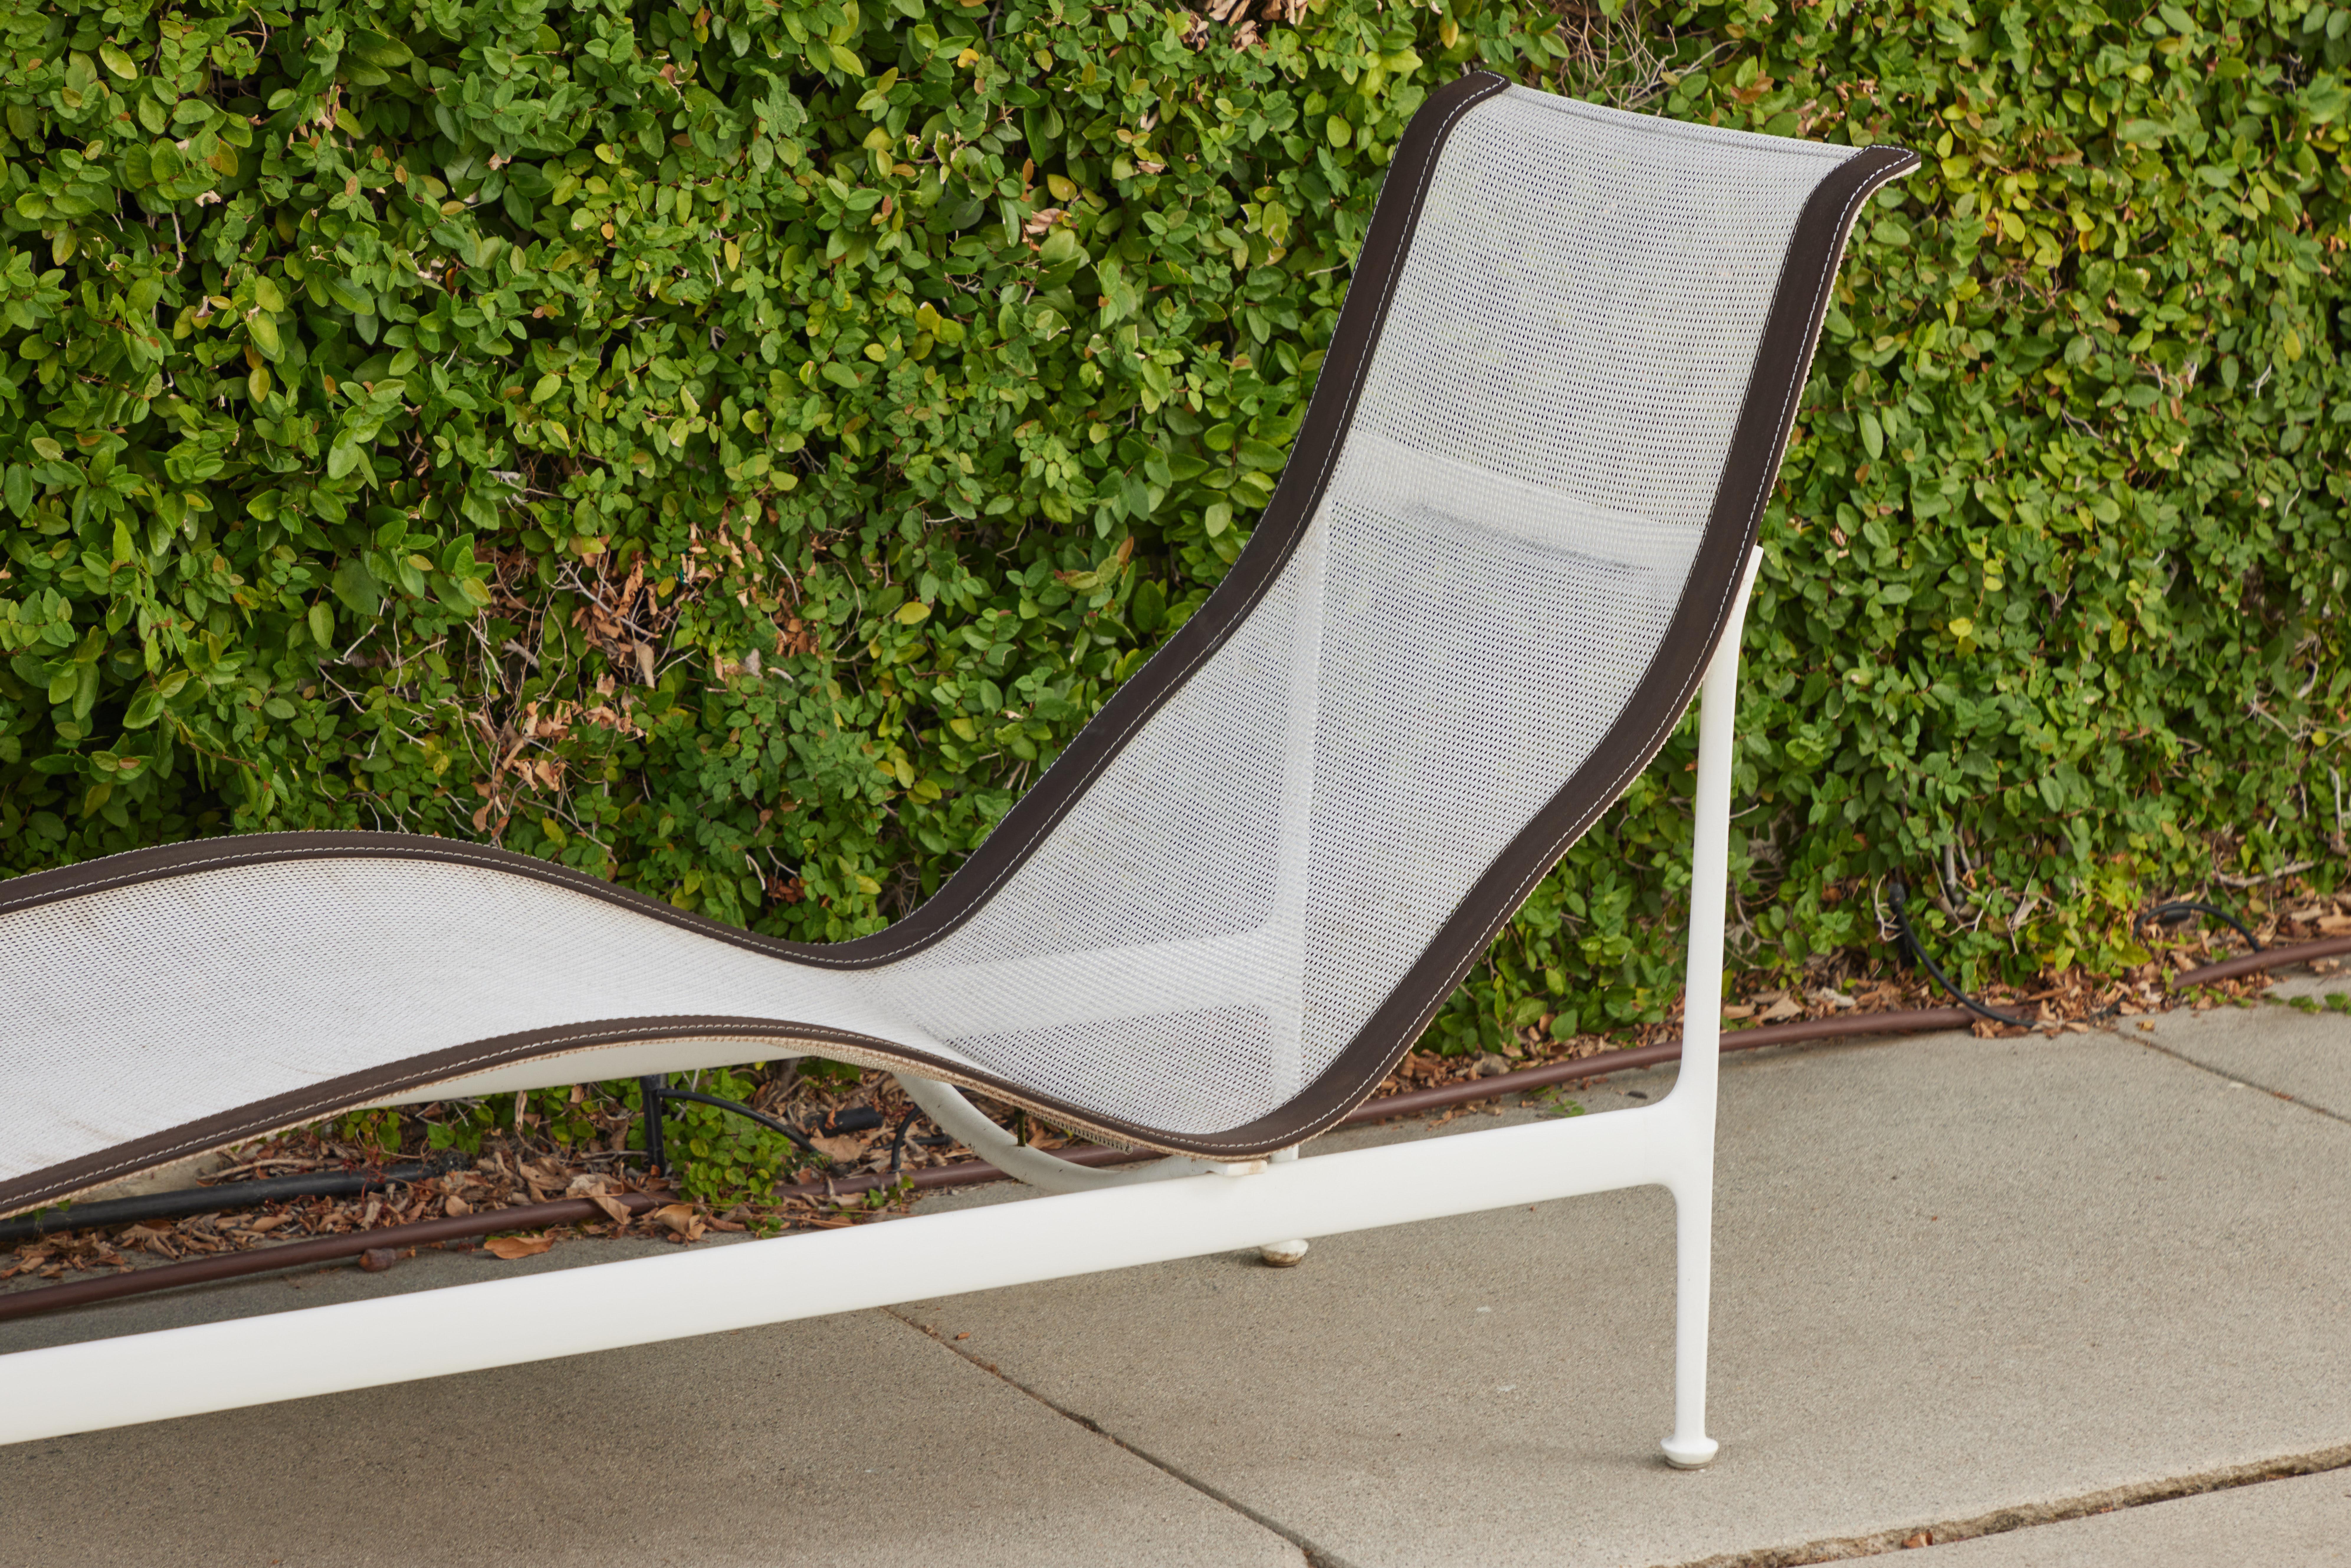 Vintage 1966 Richard Schultz Outdoor Contour Chaise Lounge for Knoll. Executed in enameled aluminum and mesh with Knoll manufacturer's stamp on the underside of the chair. 

A clean and iconic outdoor design launched in 1966 and in continual